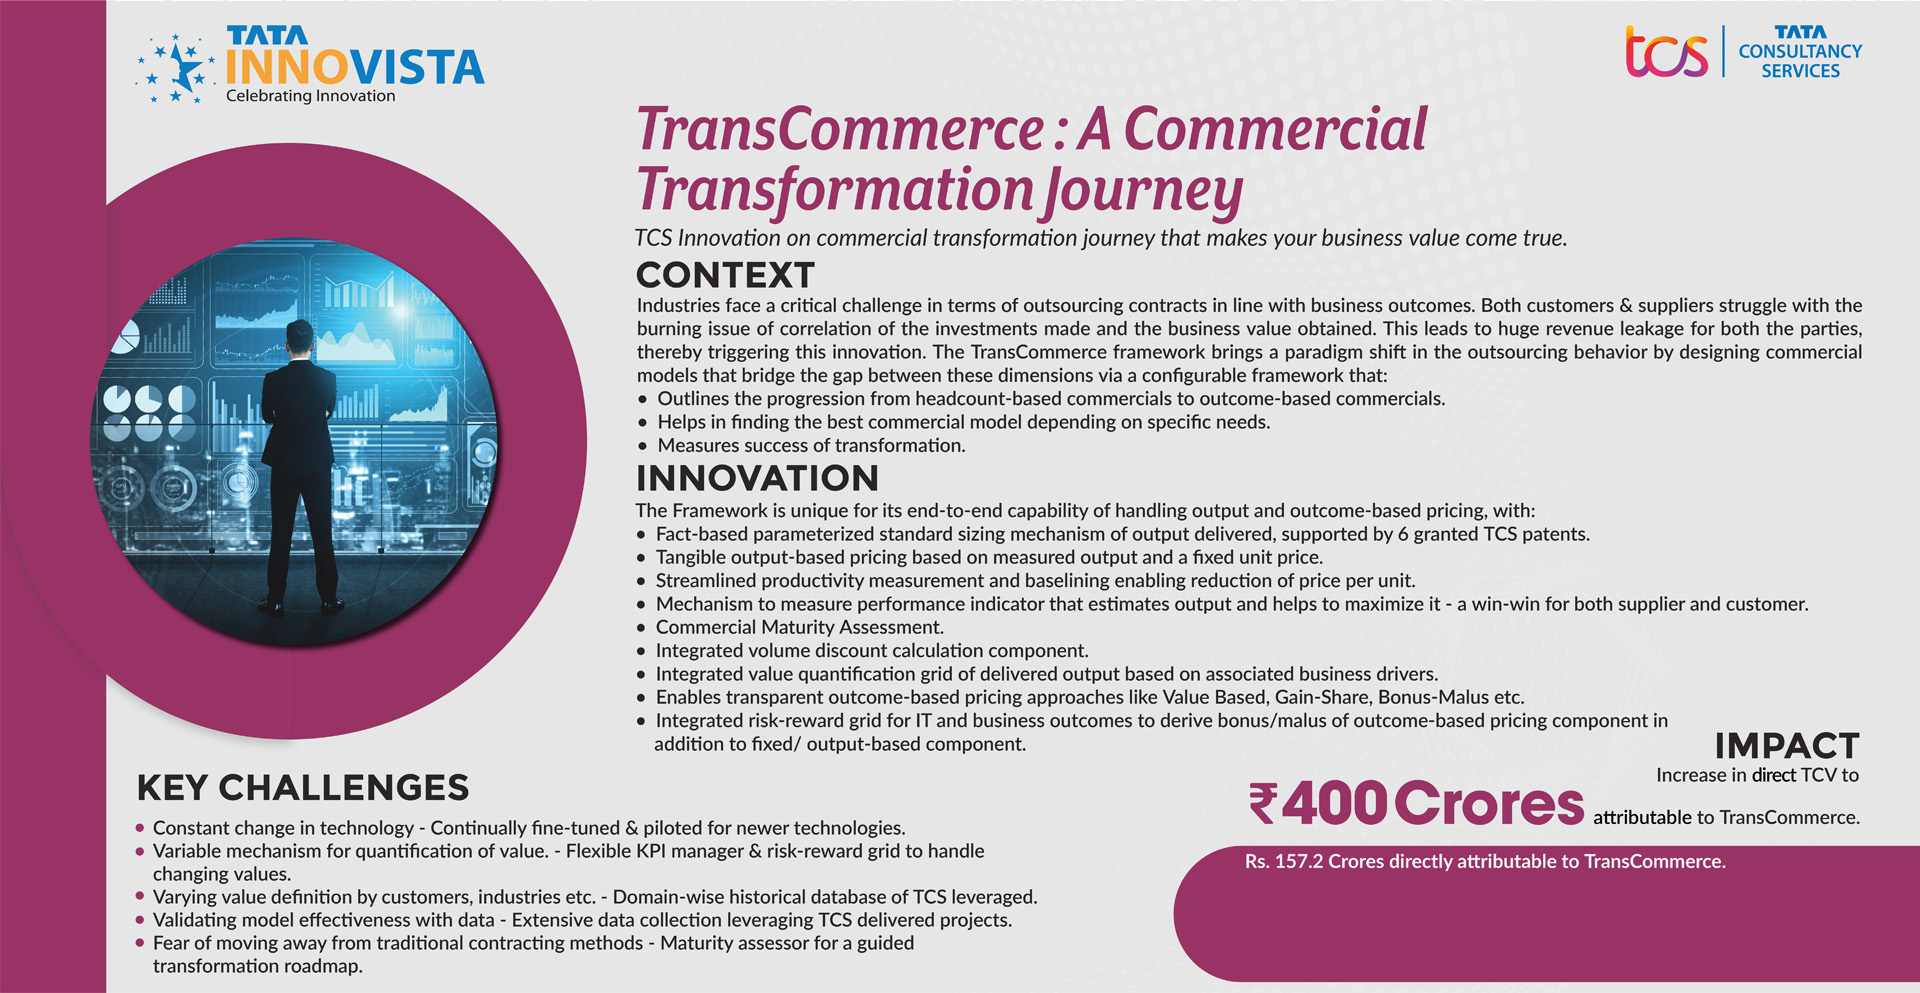 Tata Consultancy Services - TransCommerce